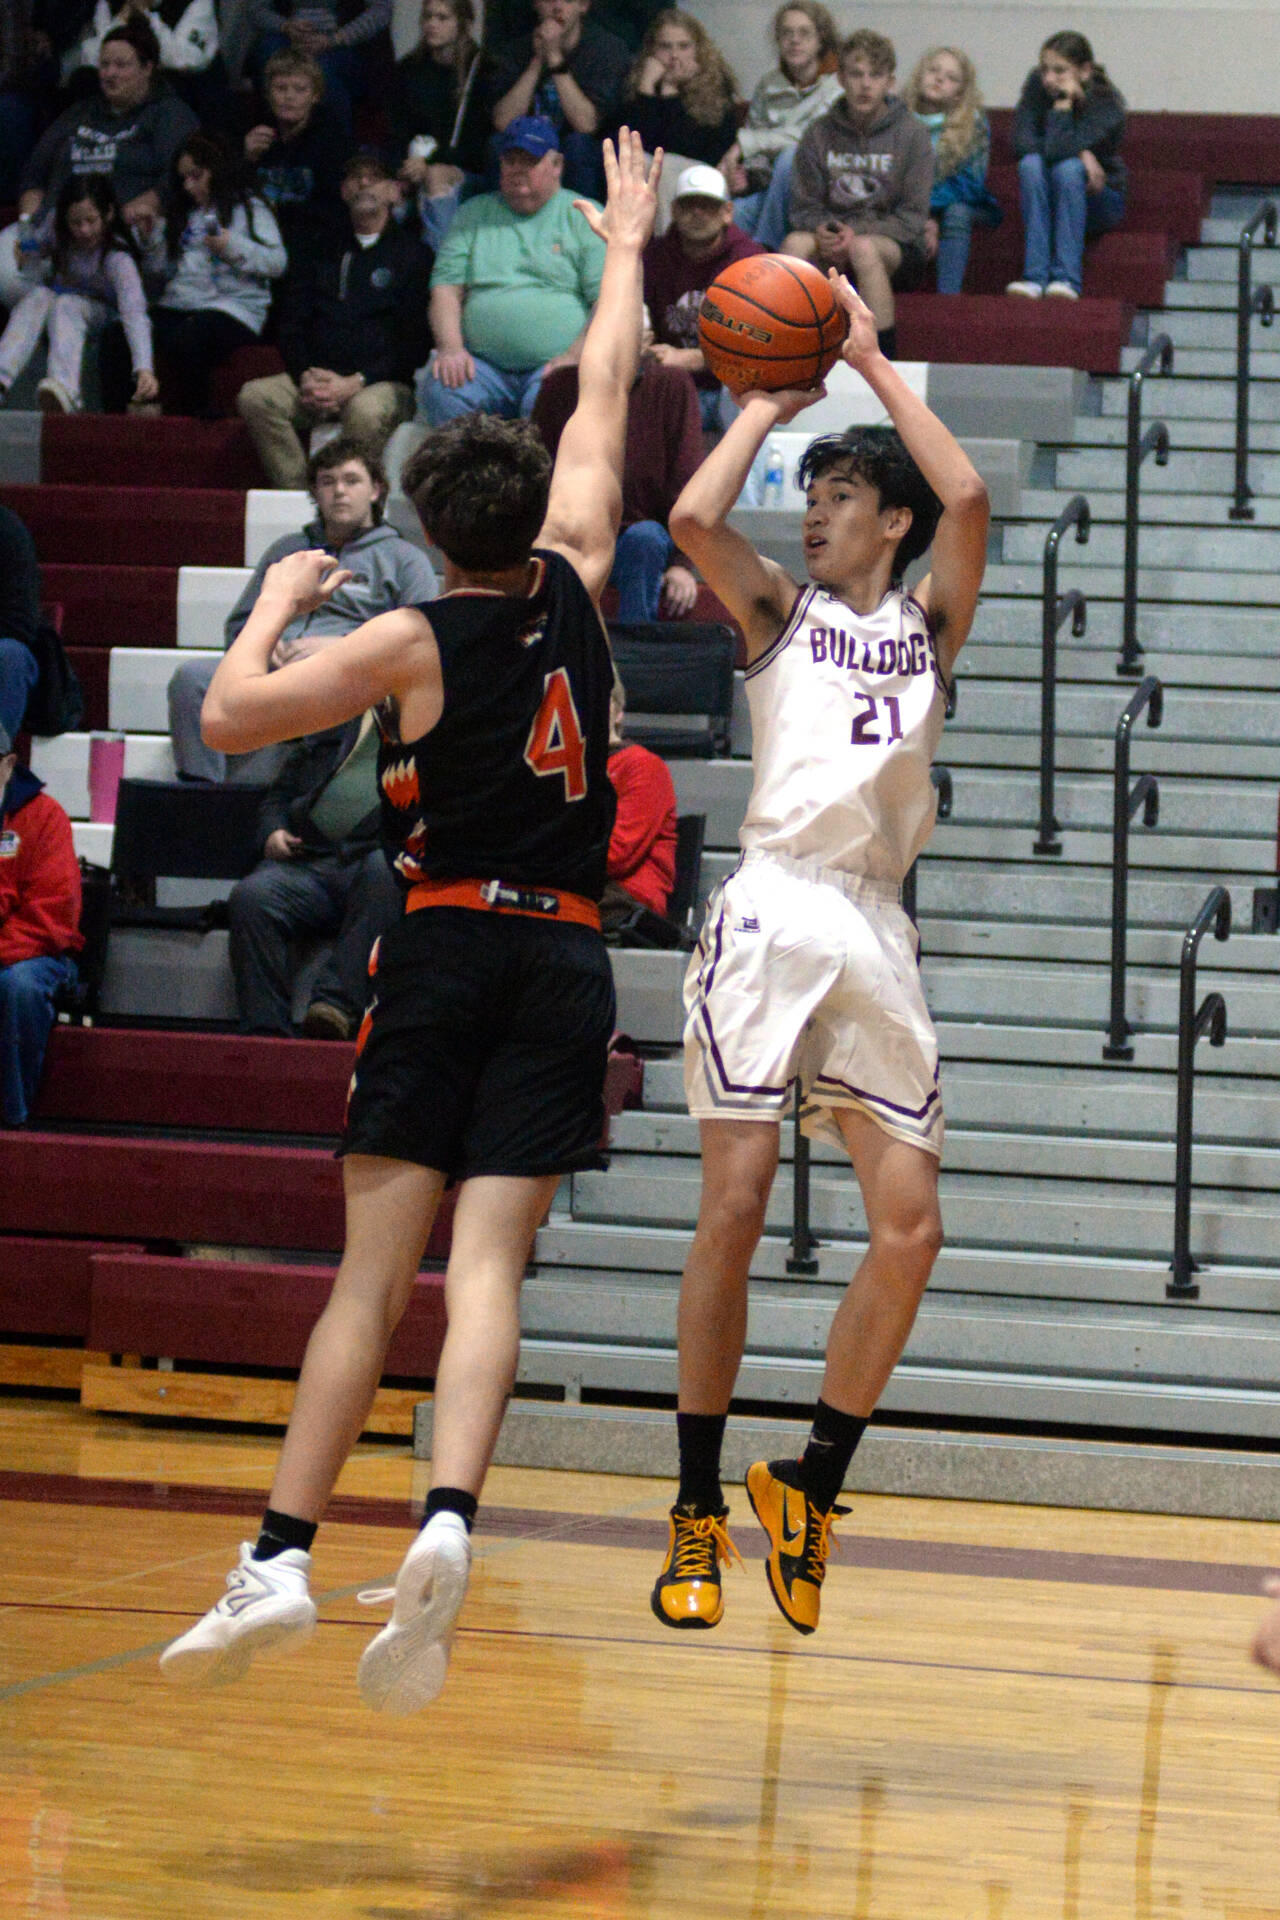 RYAN SPARKS | THE DAILY WORLD Montesano guard Delon Chan (21) puts up a jump shot against Centralia’s Aidan Haines during the Bulldogs’ 69-43 win on Tuesday in Montesano. Chan had 24 points to lead all scorers.